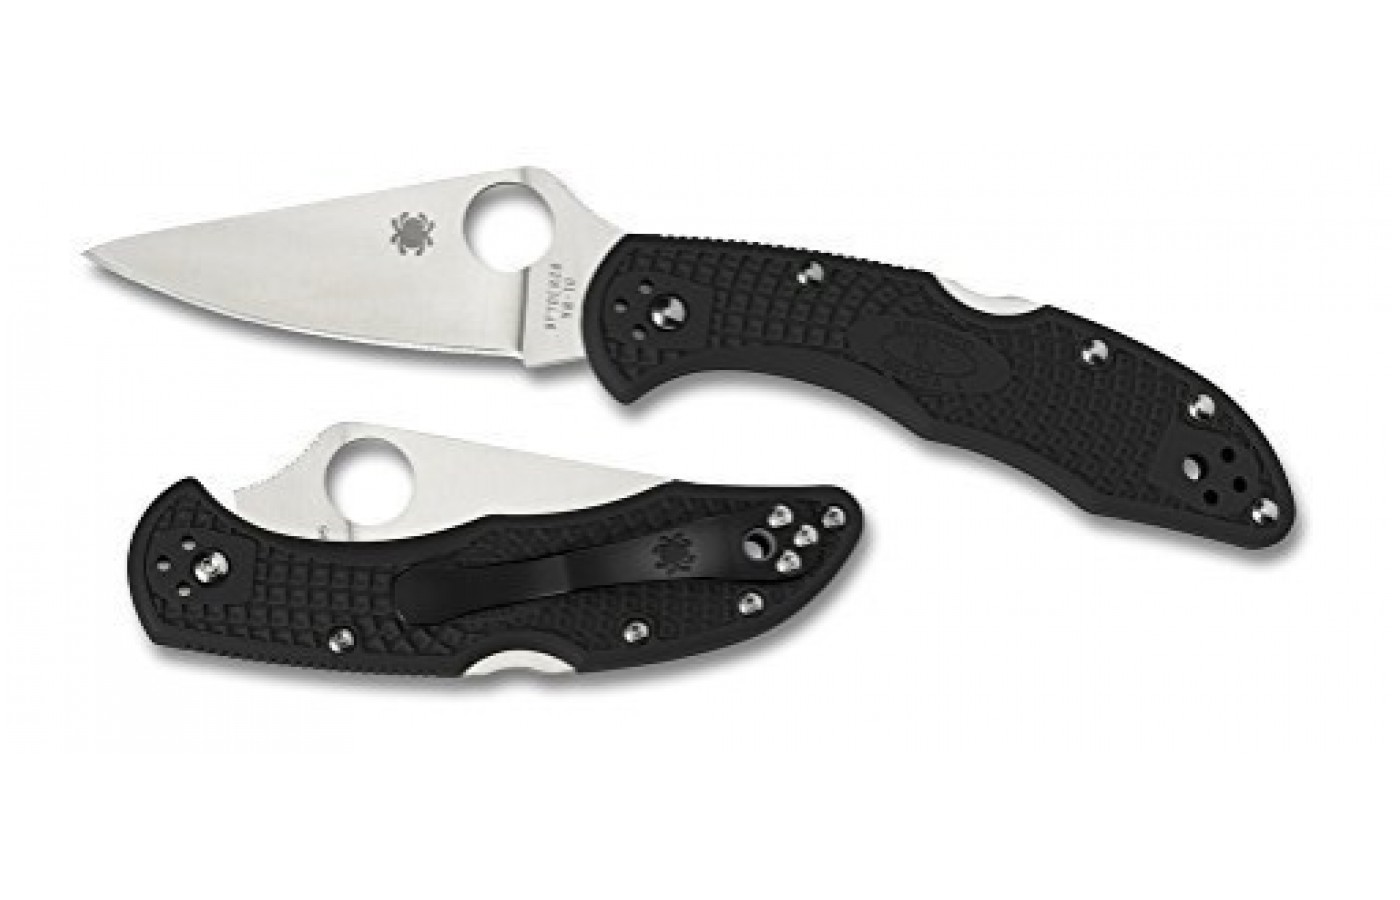 Delico 4 comes with a variety of handle options.